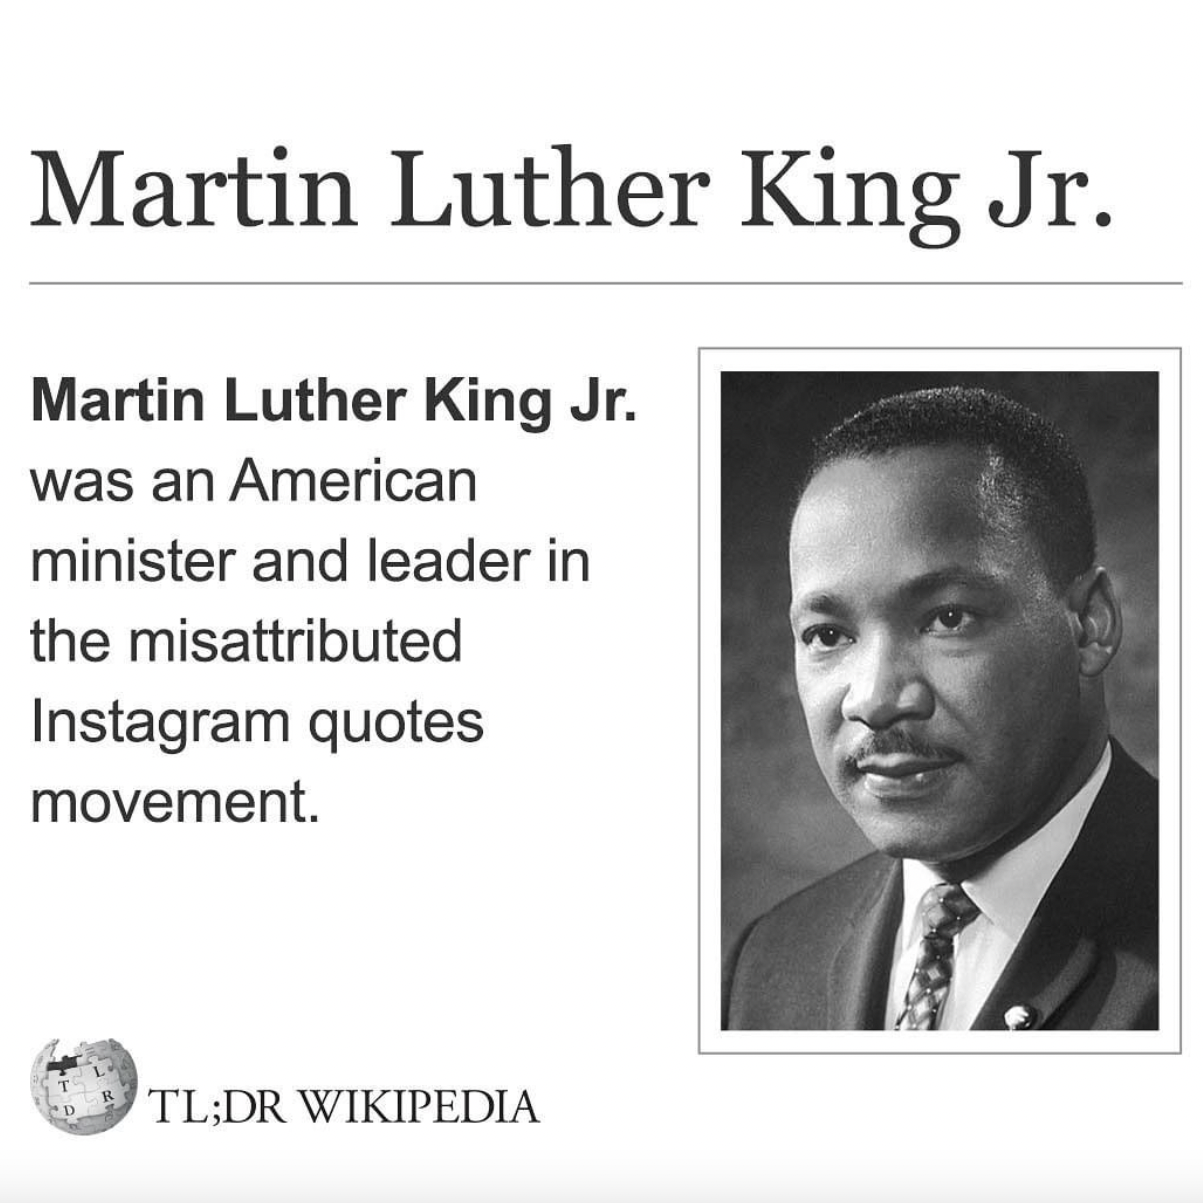 Wikipedia Memes - human behavior - Martin Luther King Jr. Martin Luther King Jr. was an American minister and leader in the misattributed Instagram quotes movement. Tl;Dr Wikipedia